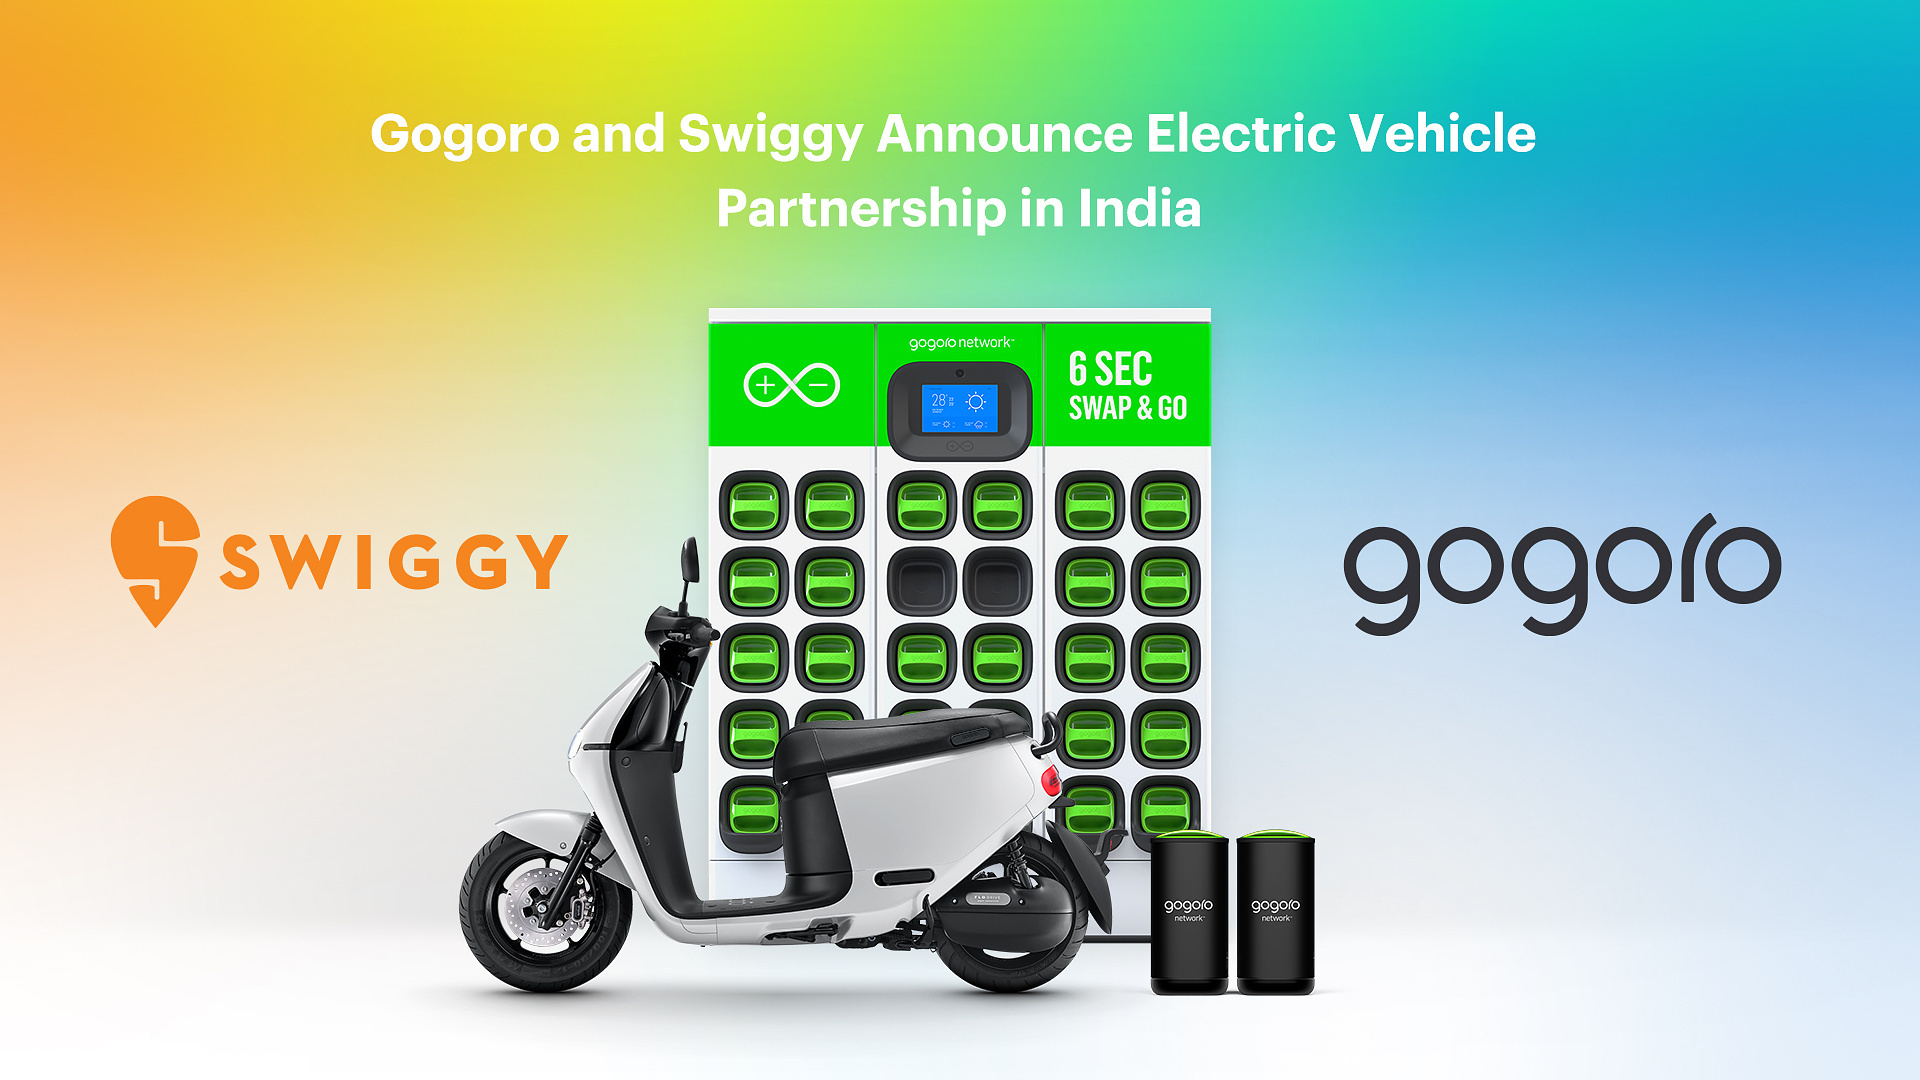 https://e-vehicleinfo.com/gogoro-signed-ev-partnership-with-swiggy-for-last-mile-delivery-in-india/